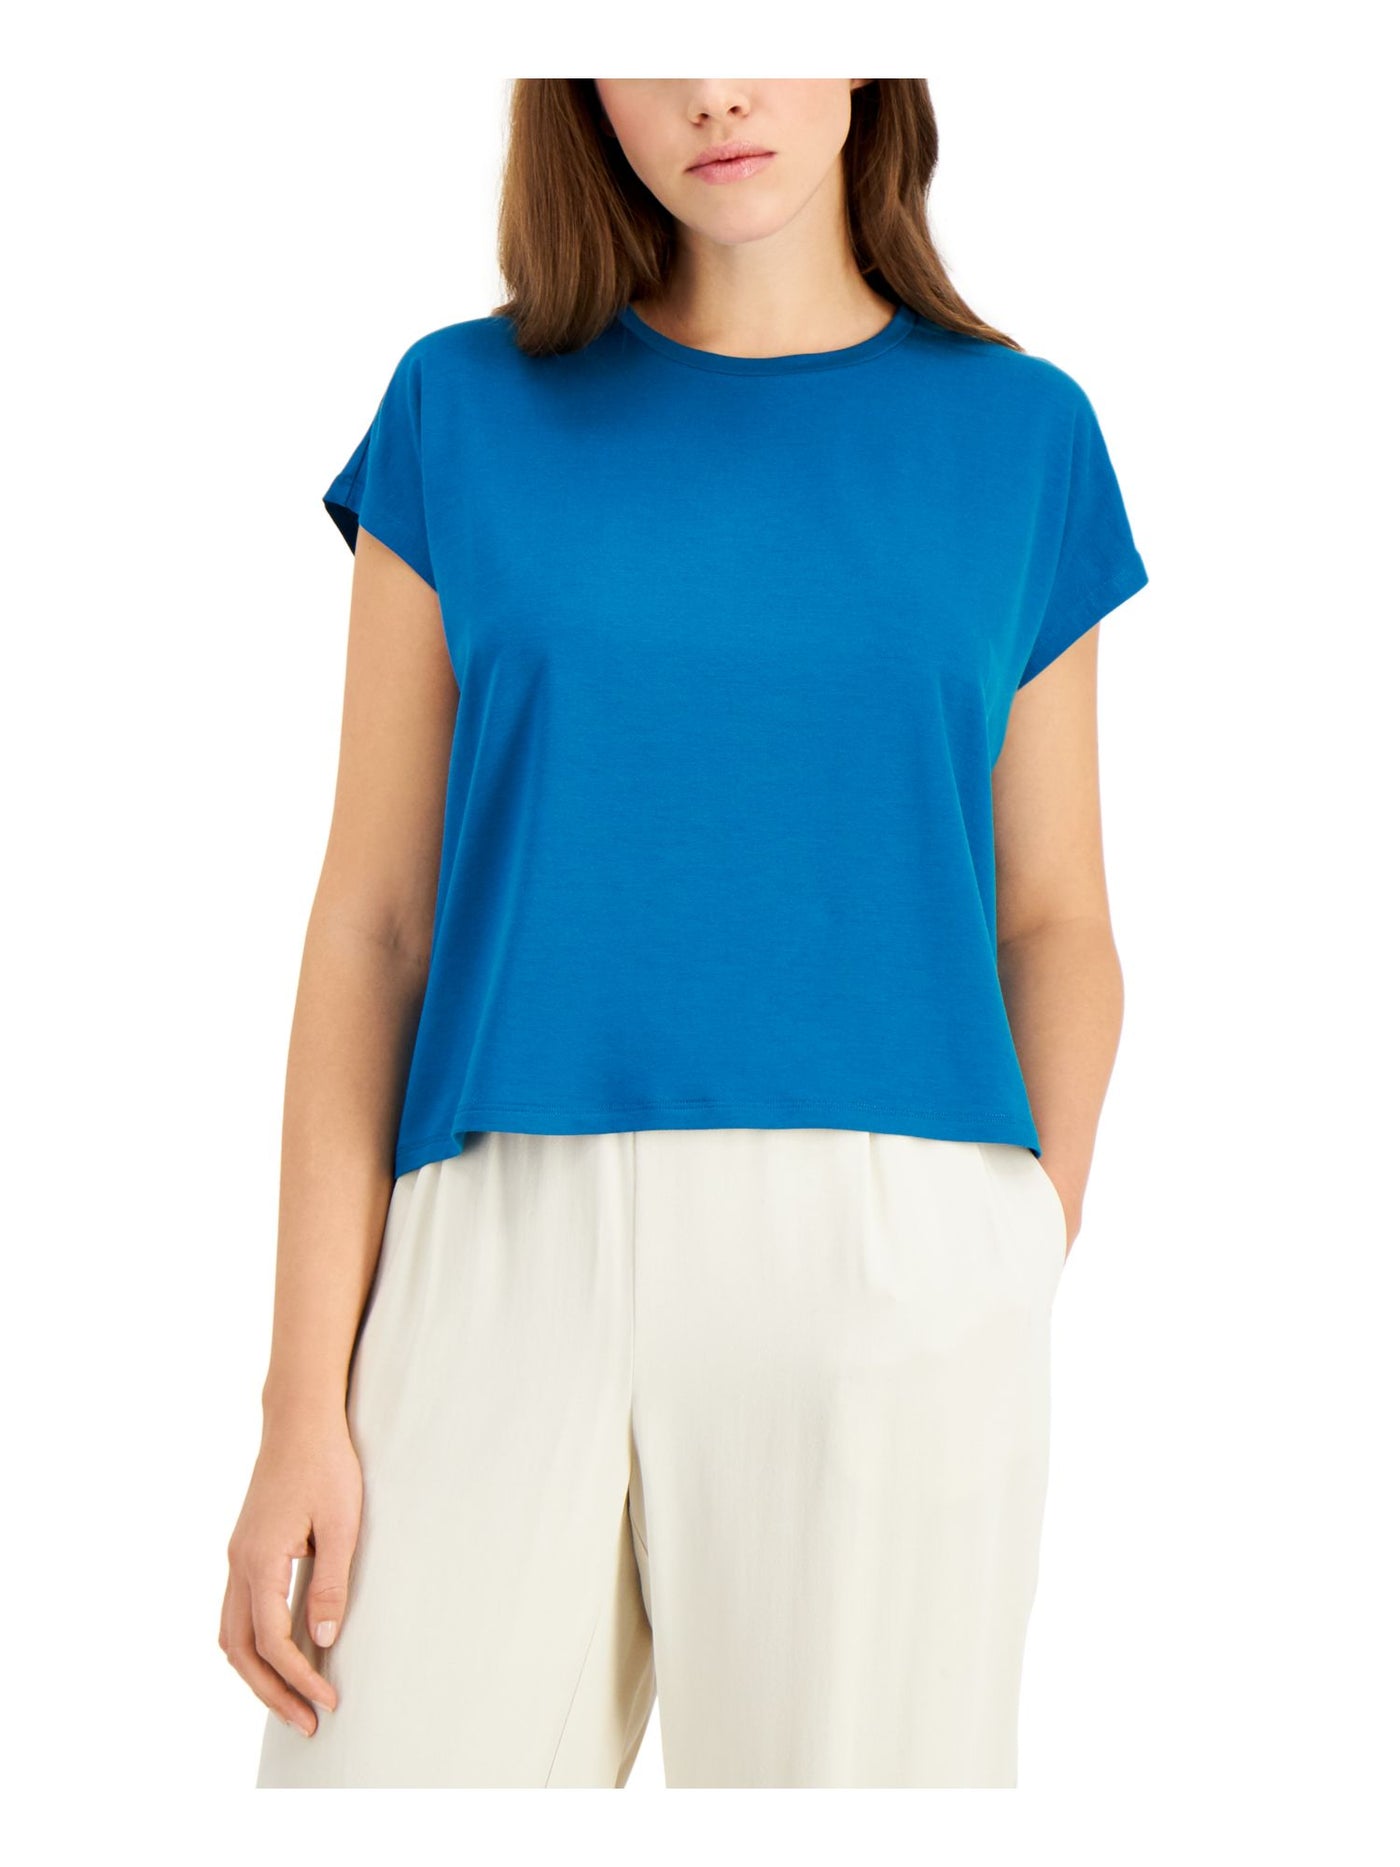 EILEEN FISHER Womens Turquoise Stretch Crew Neck Top XS